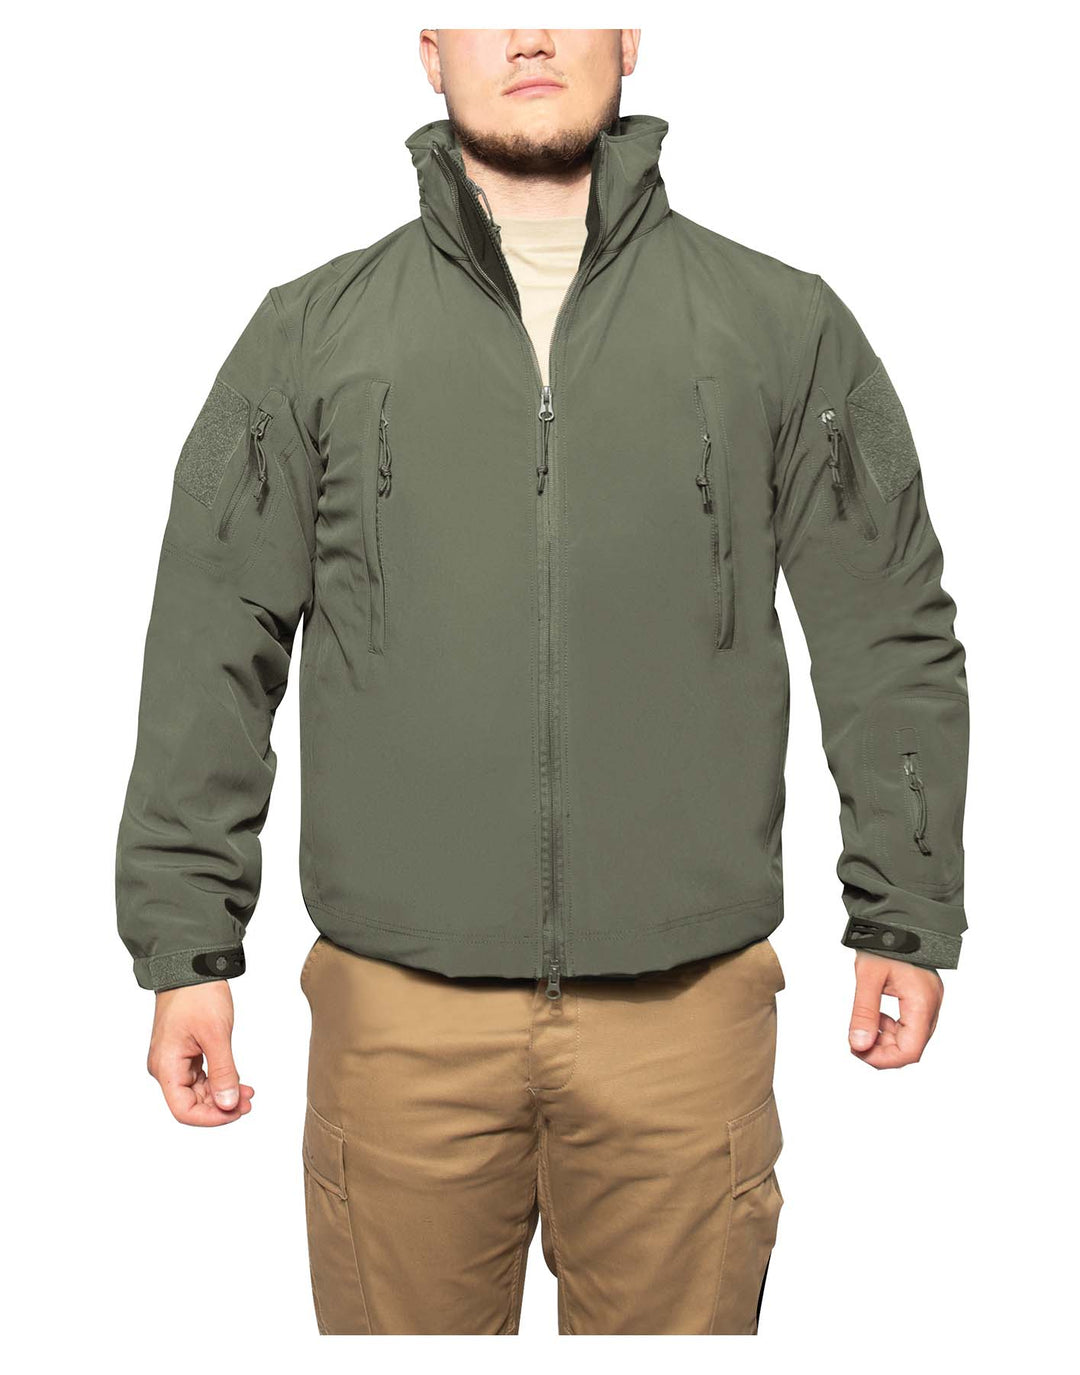 Rothco Mens 3-in-1 Special Ops Soft Shell Jacket